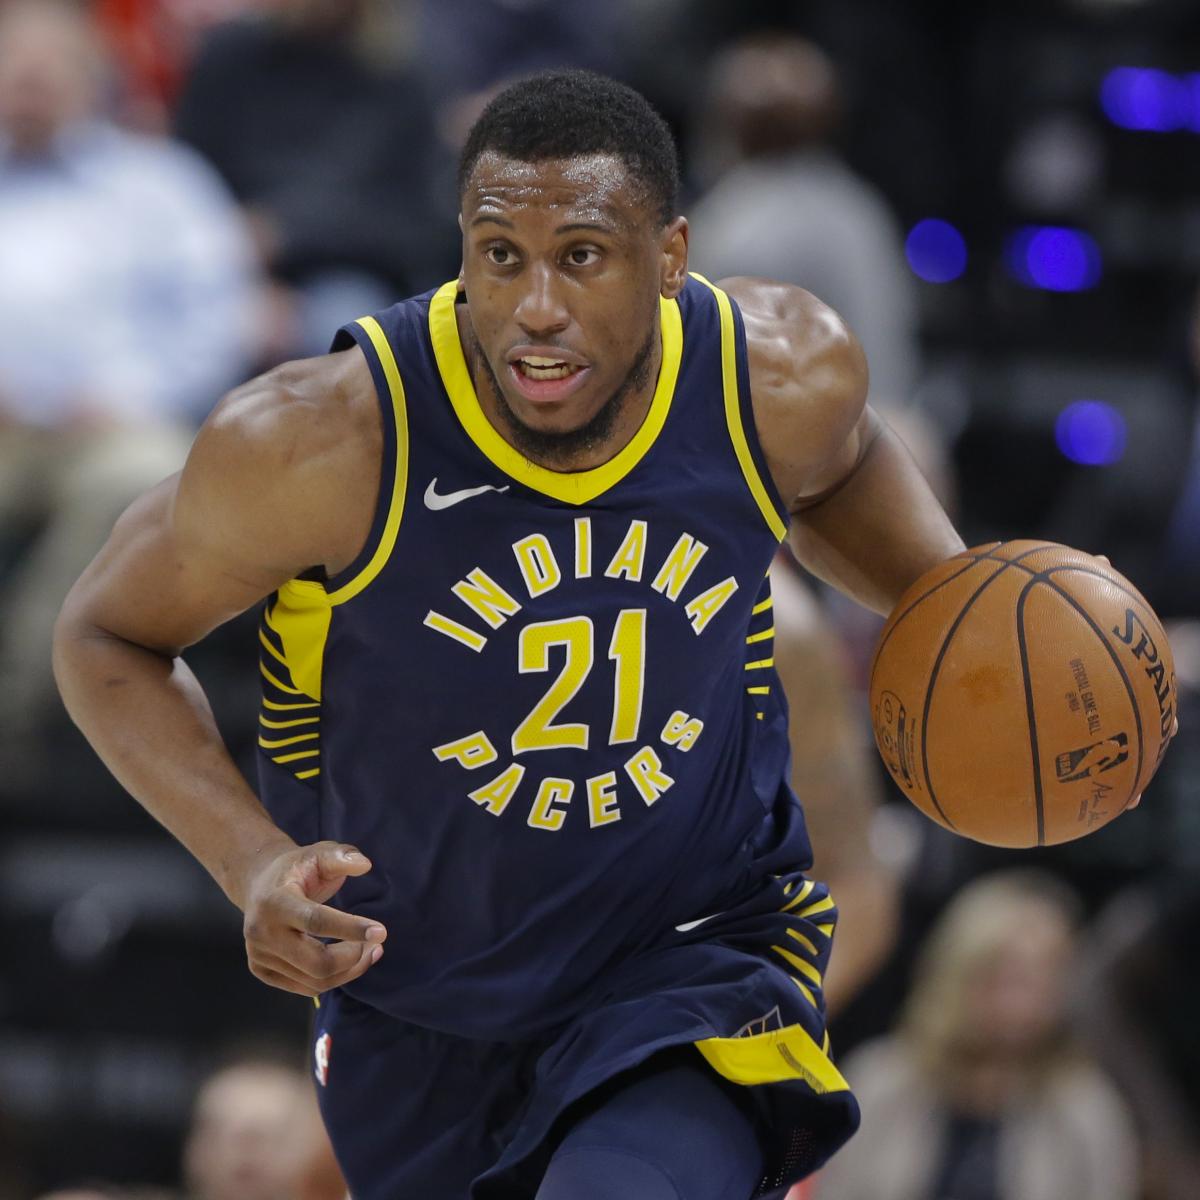 Pacers acquiring Thaddeus Young